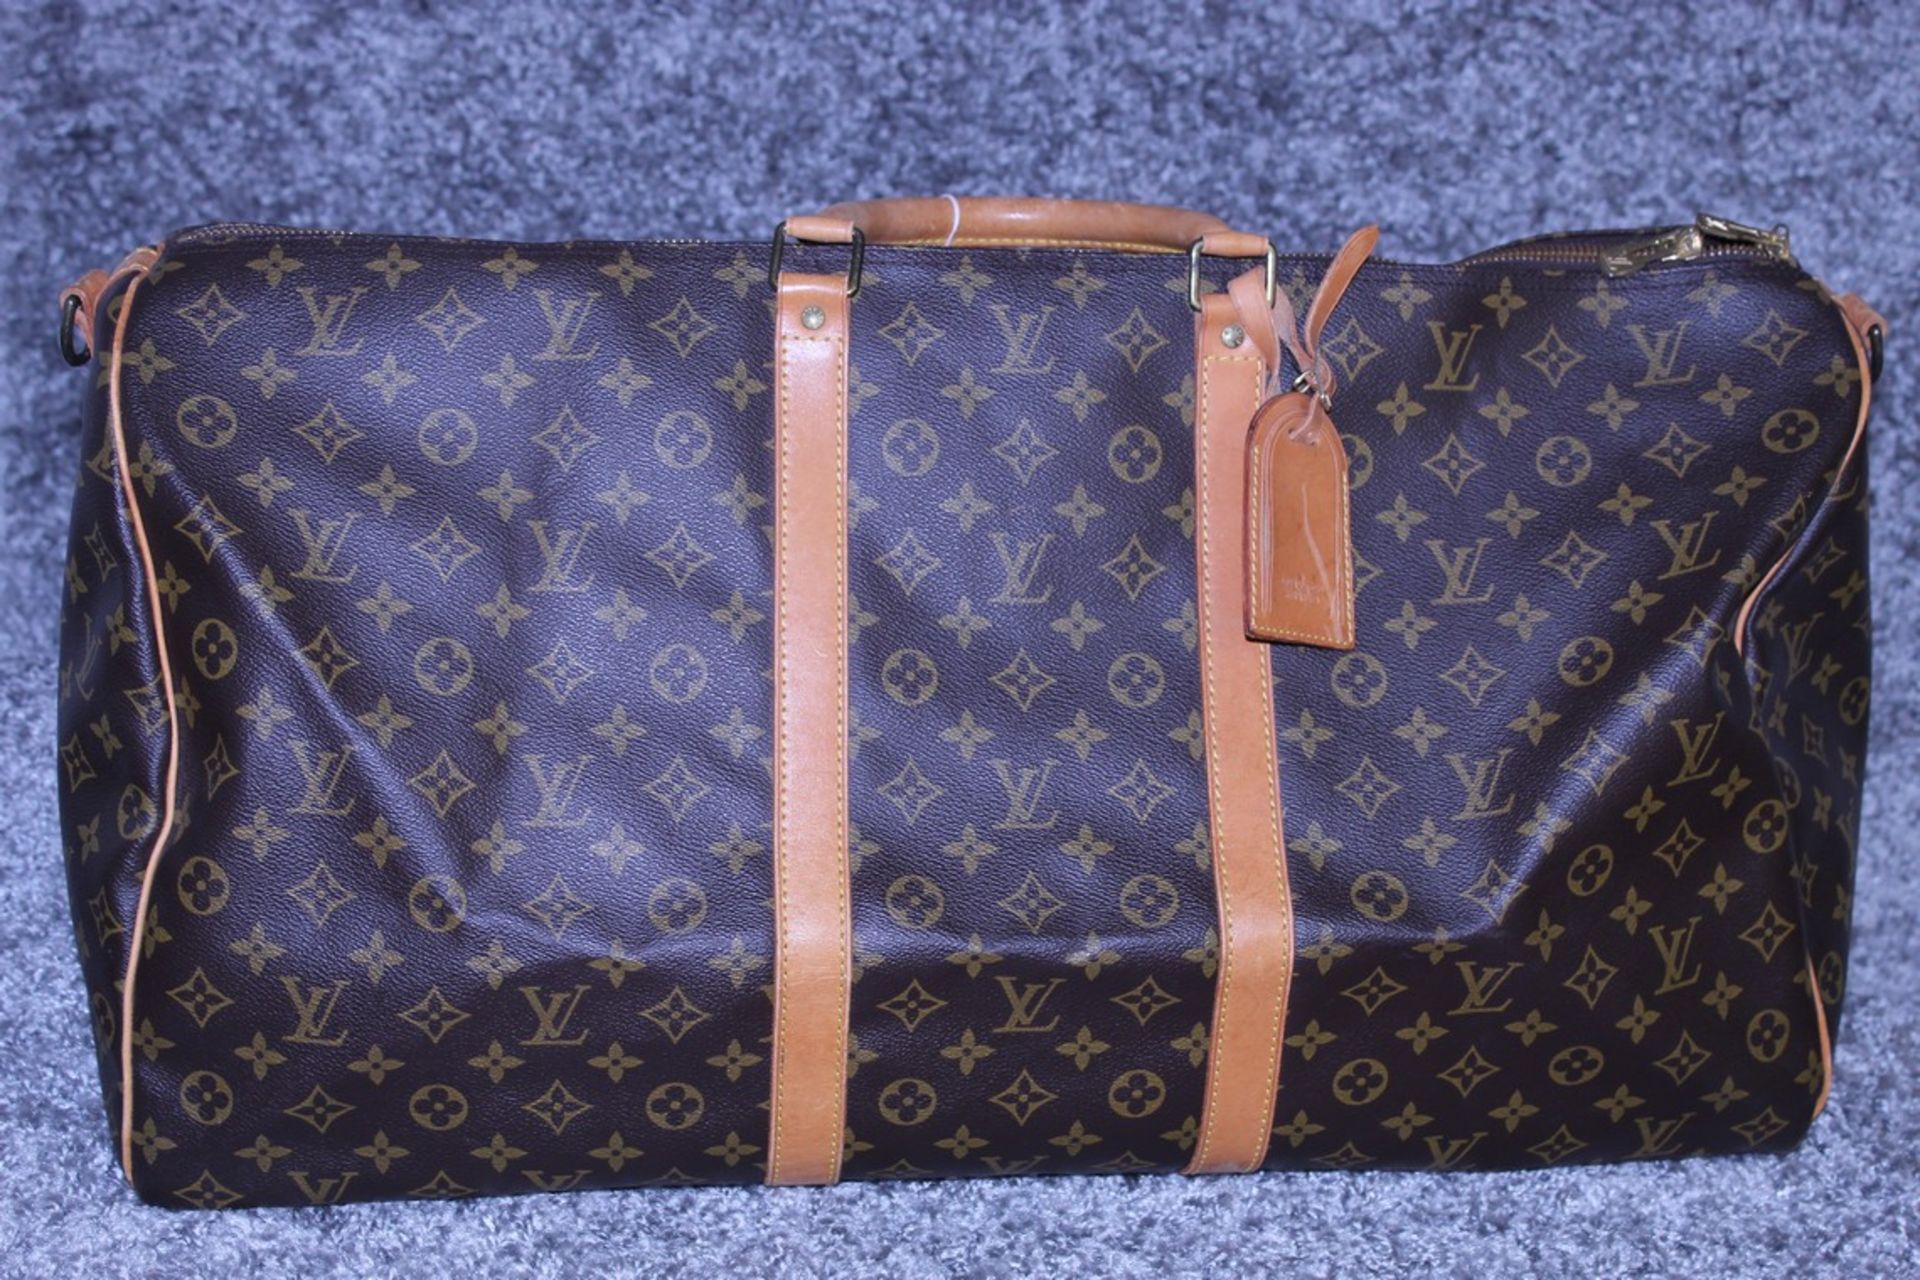 Rrp £1,800 Louis Vuitton Keepall Bandouliere Travel Bag - Image 2 of 5